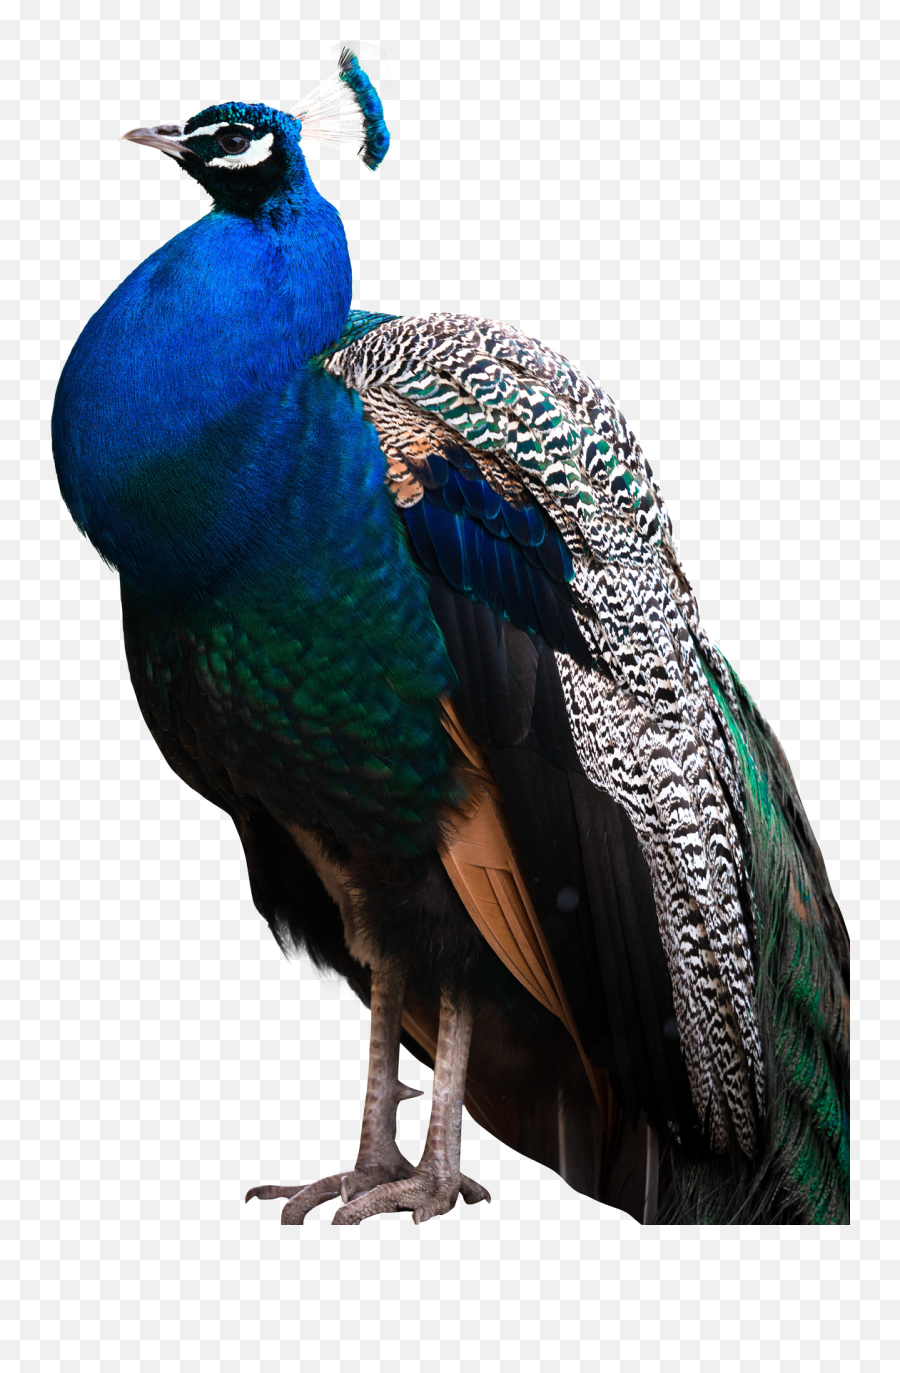 Peacock Png Images Free Download - Transparent Peacock Png,Peacock Feathers Png